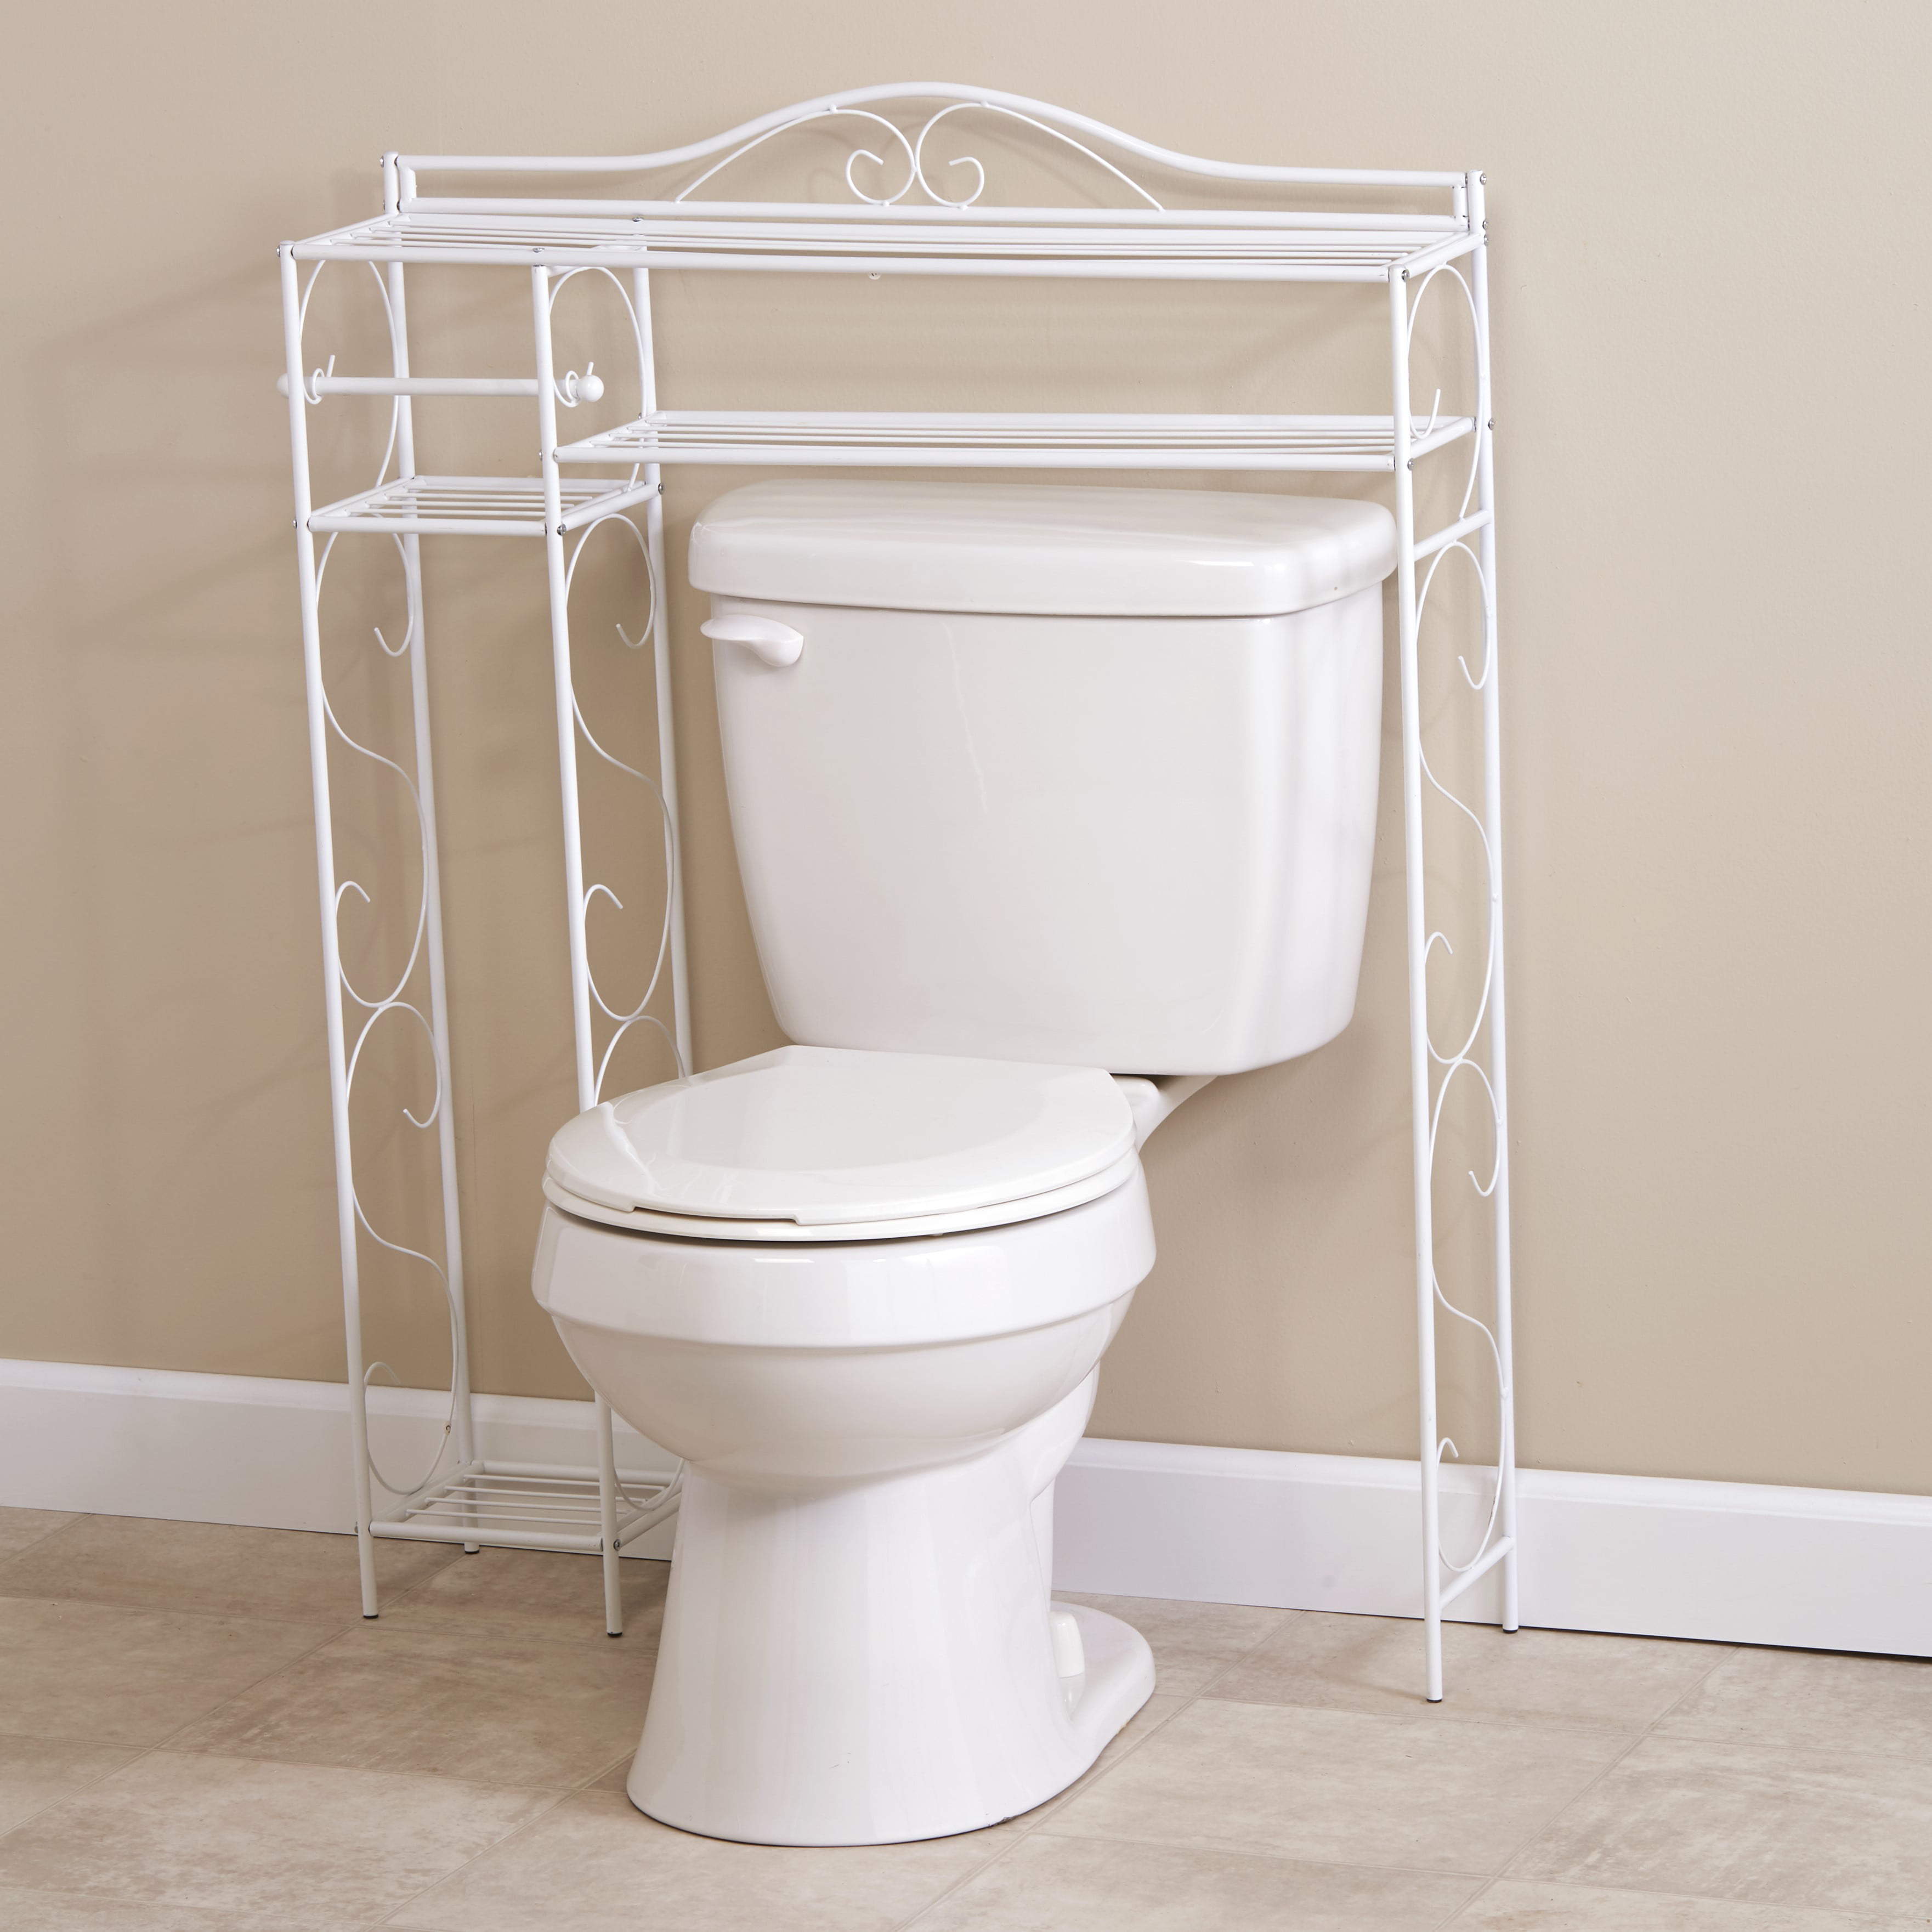 Over the Toilet Space Saver Storage Rack with 4 Shelves - Walmart.com